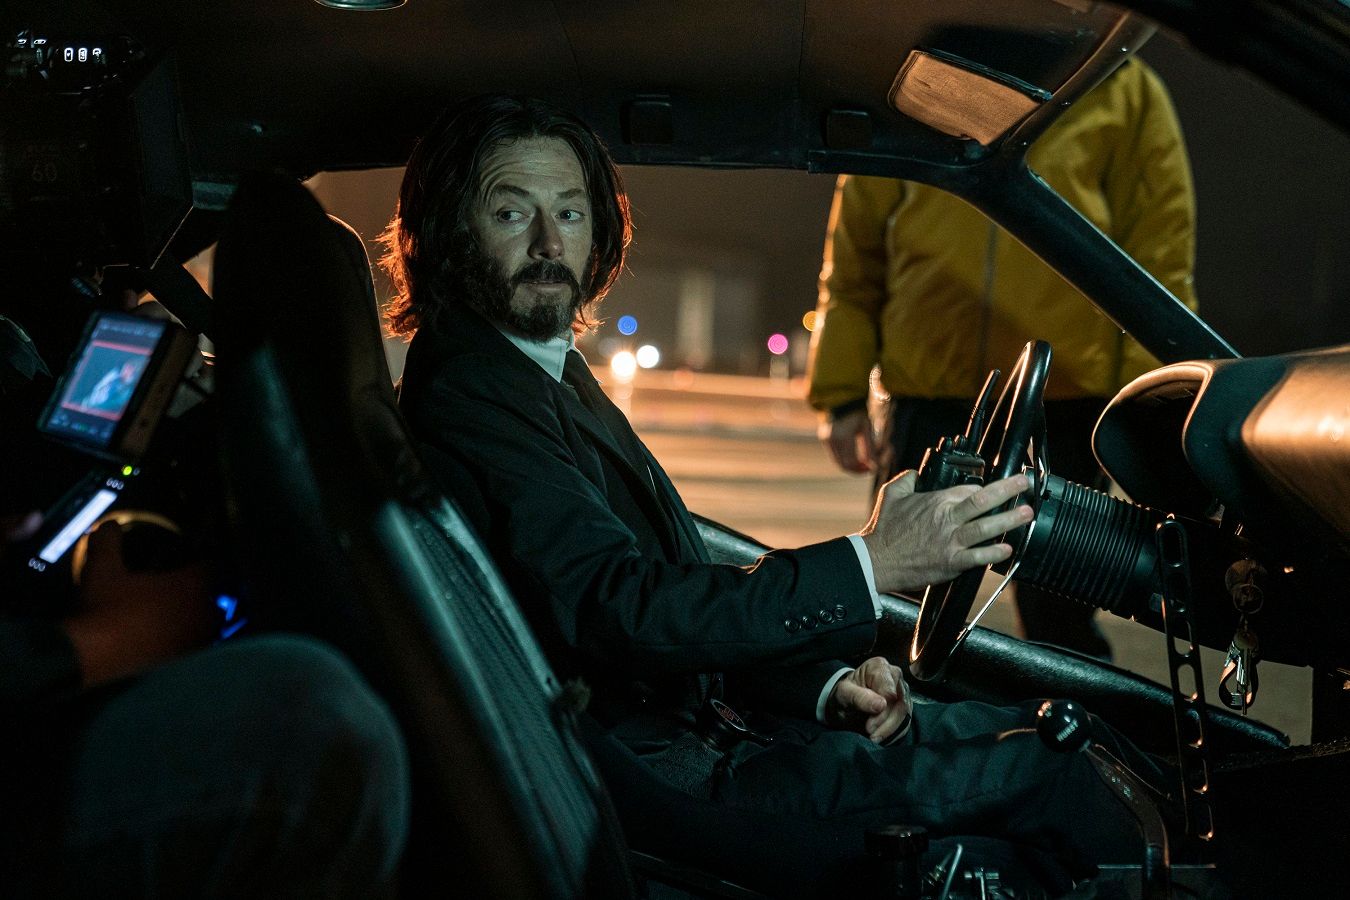 ‘There’s absolutely no doubt he’s driving’: Tanner on training Keanu Reeves for John Wick